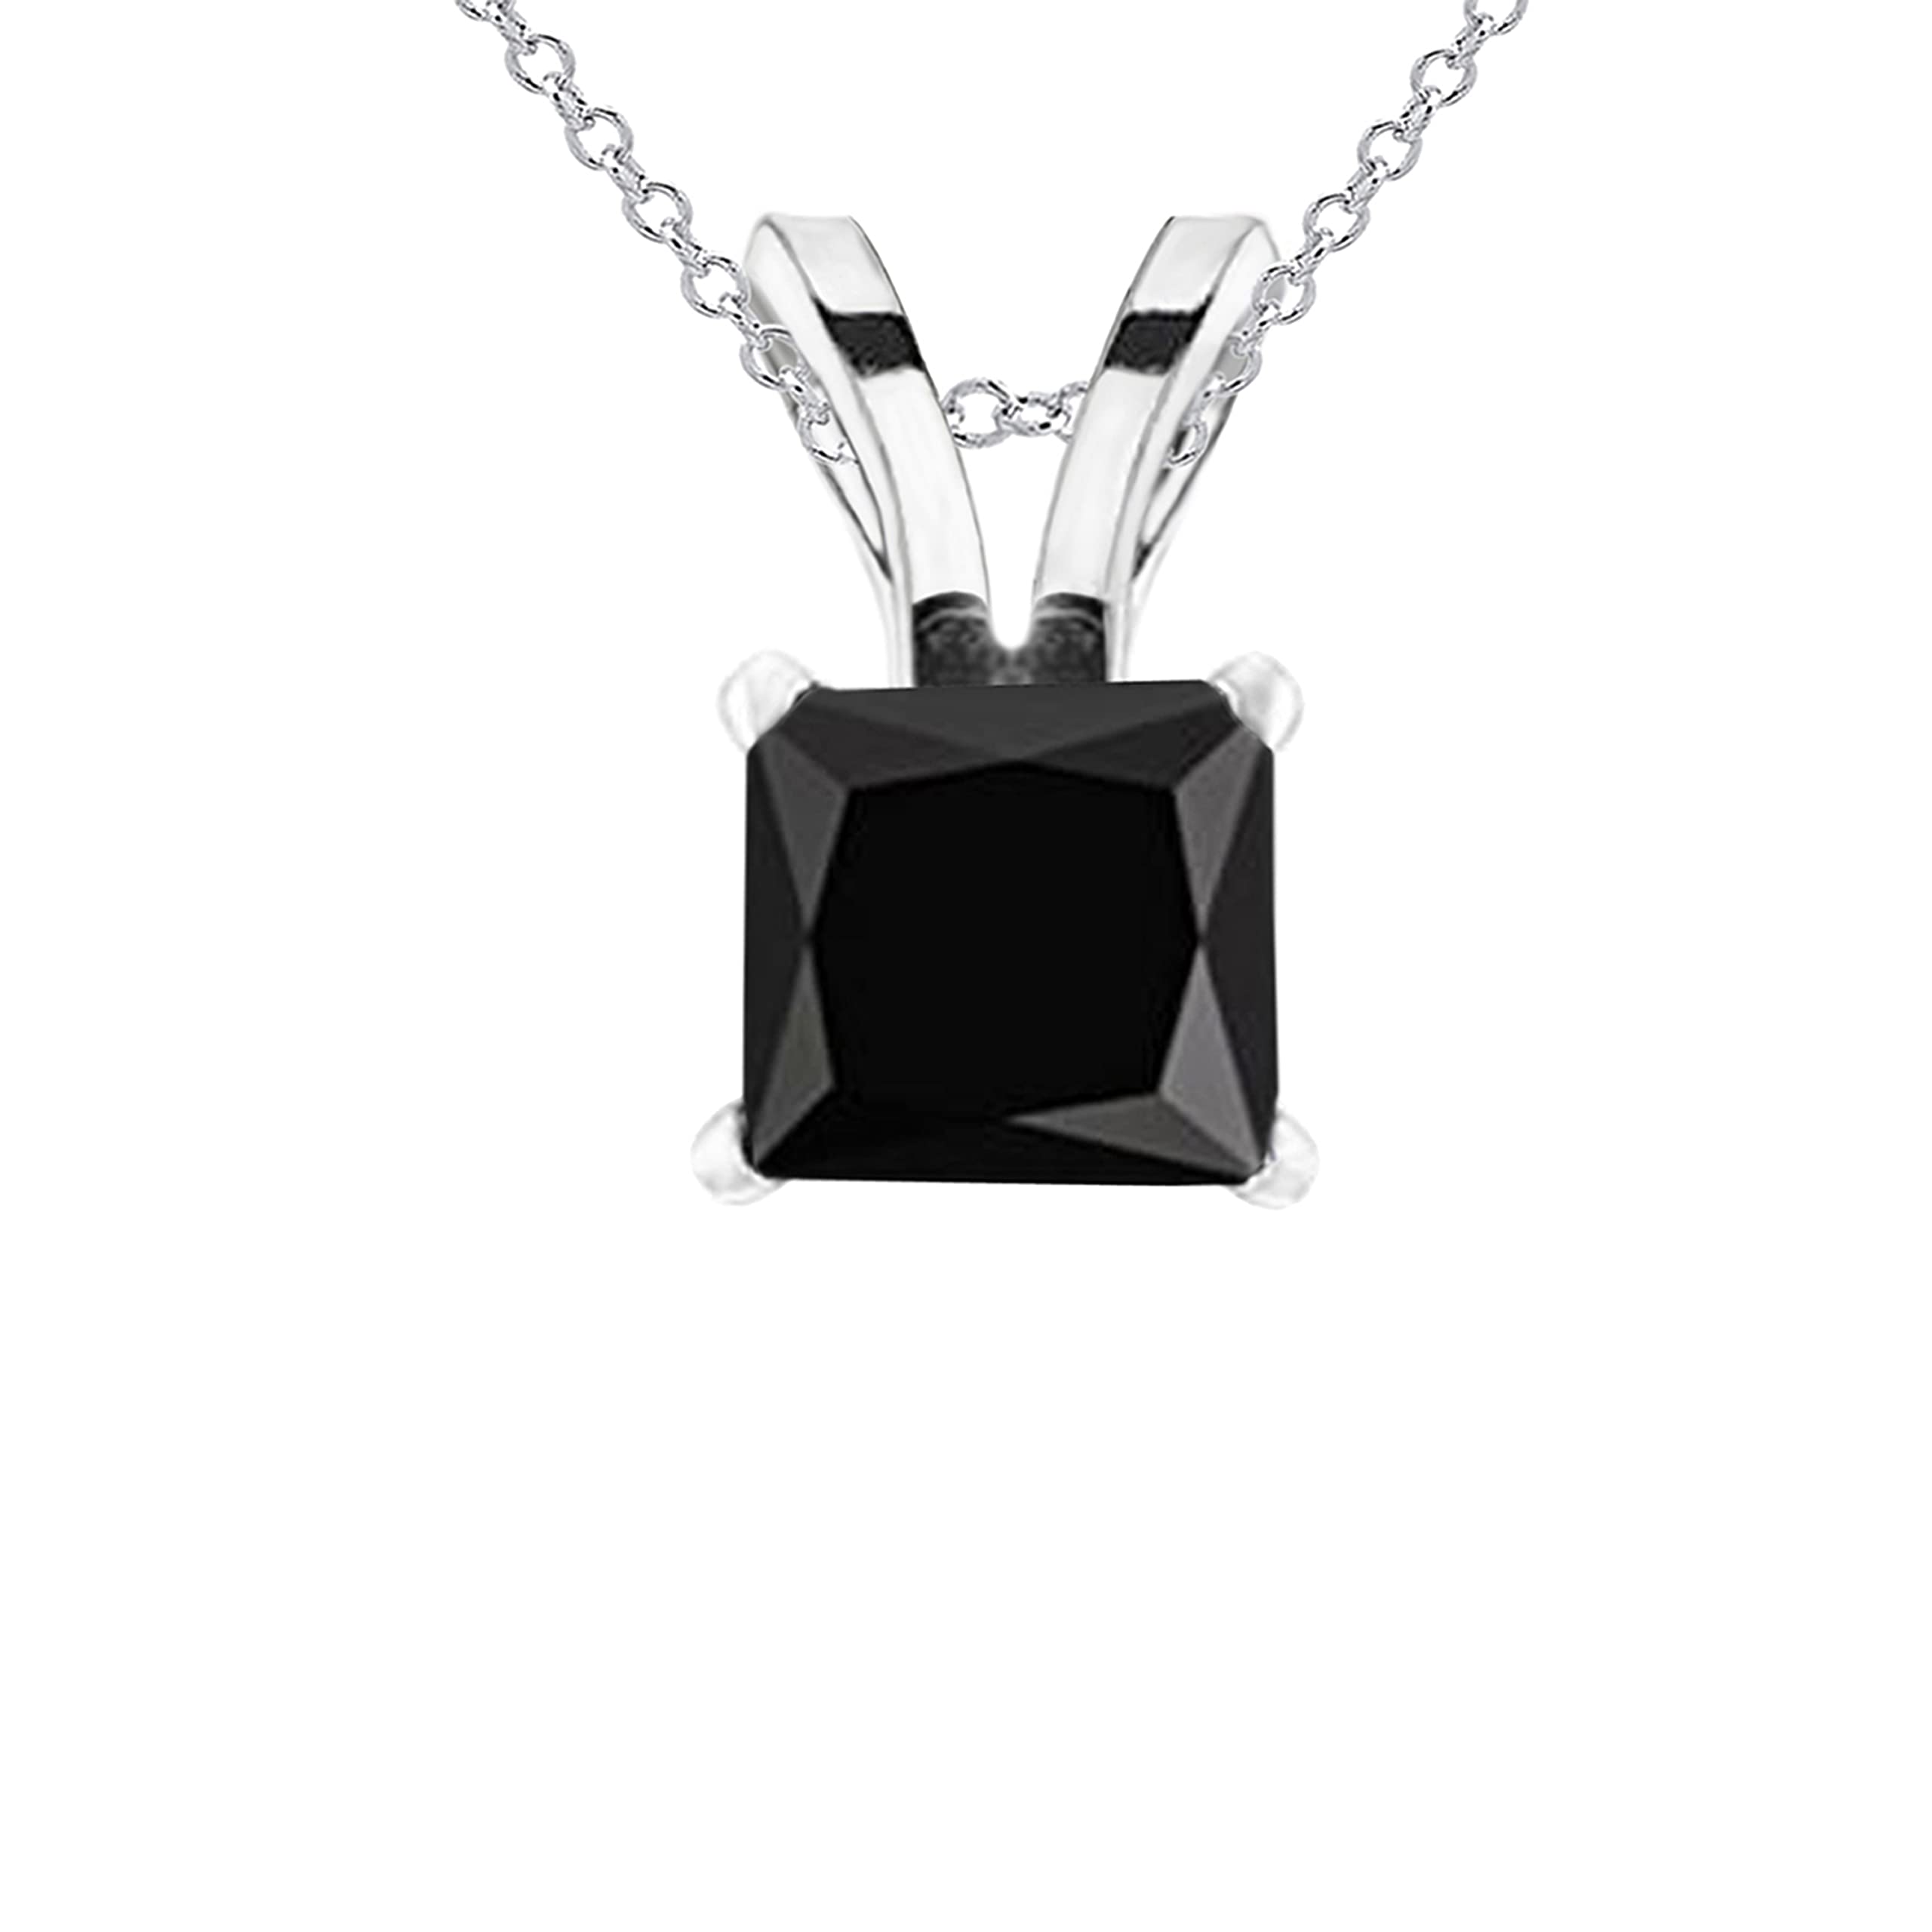 Dazzlingrock Collection Princess Black Diamond Solitaire from 1/4 Carat to 1 Carat Pendant With 18 Inch Silver Chain, 14K Gold